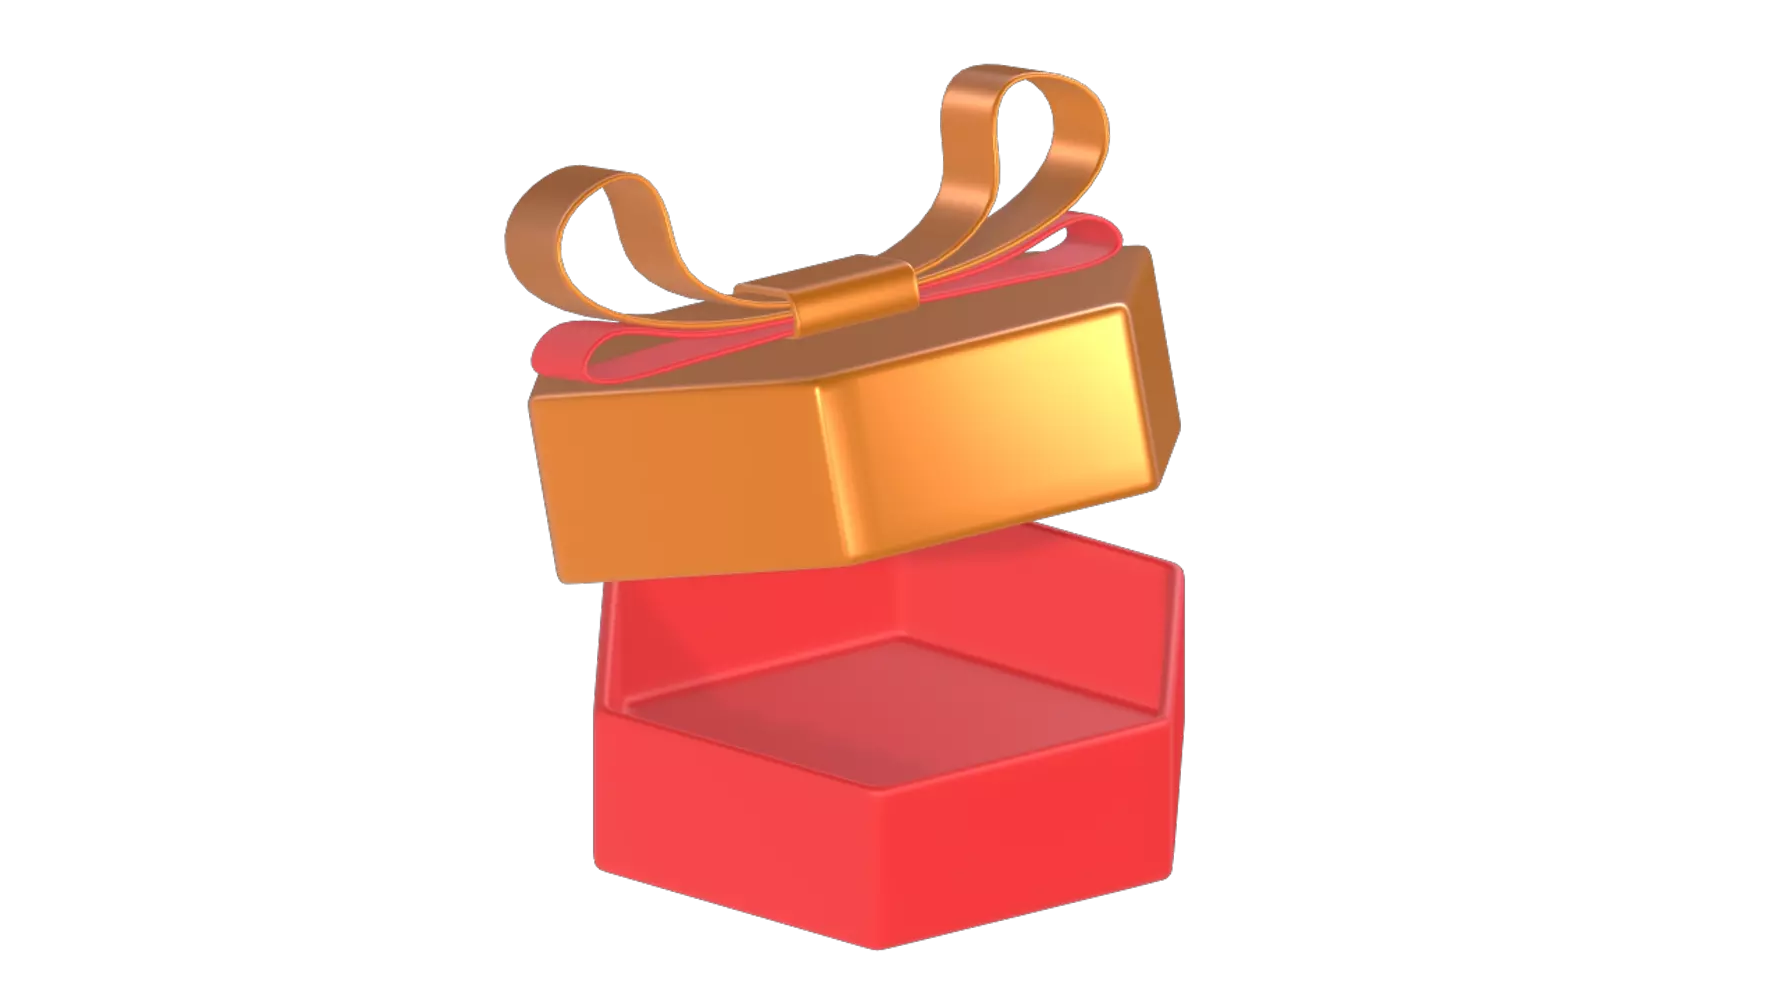 Gift Box Opened 3D Graphic